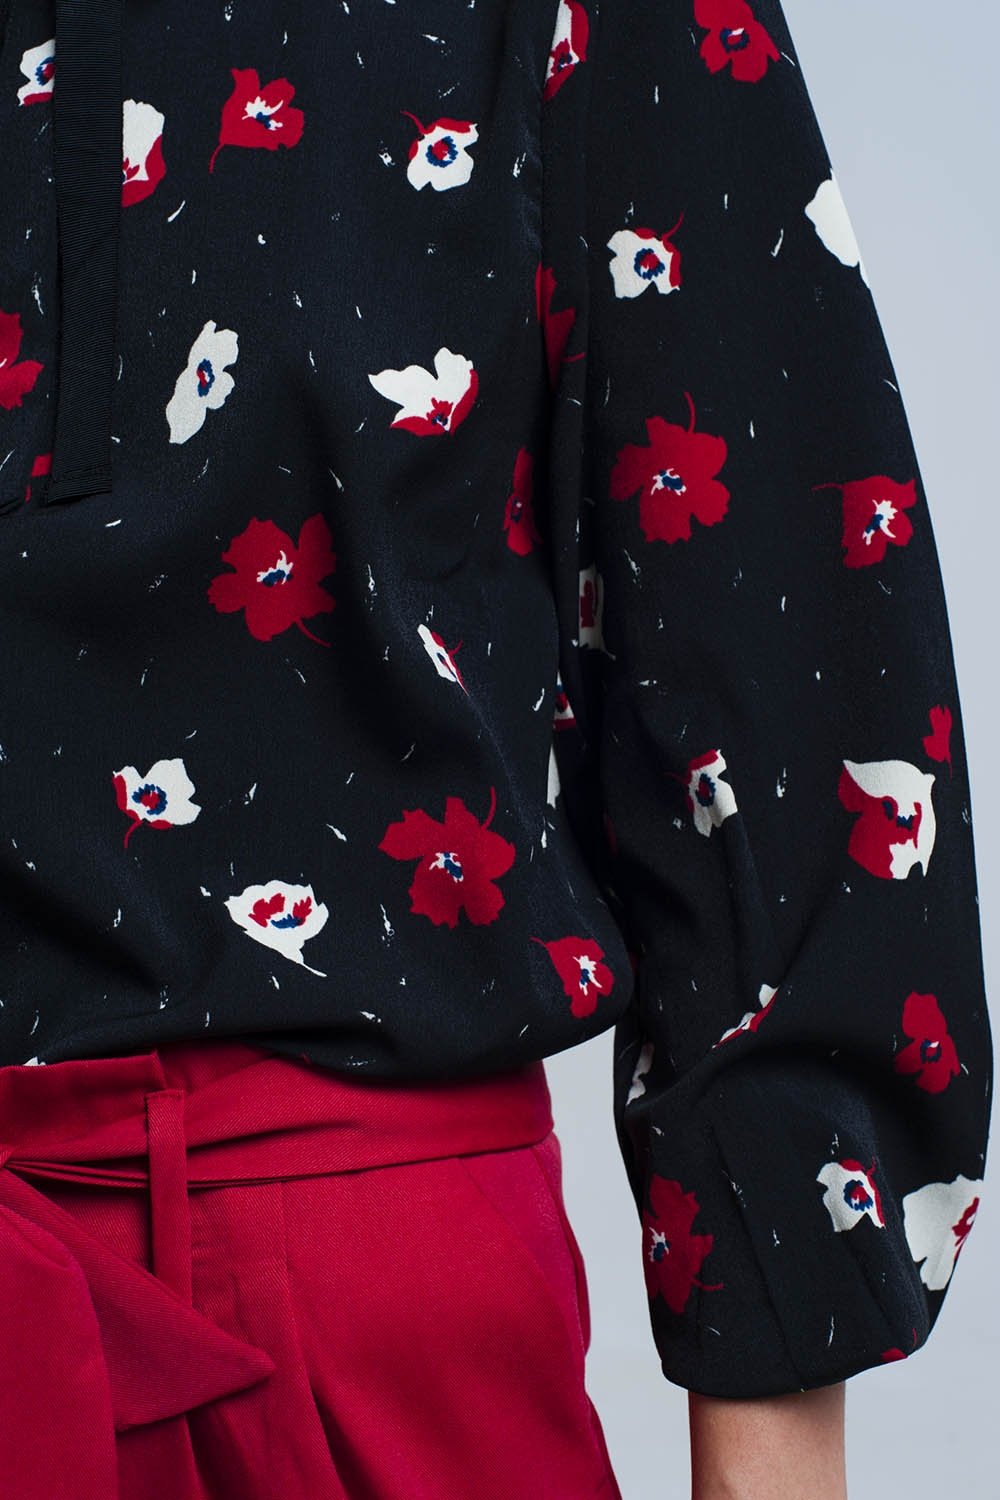 Black Shirt With Red And White Flowers Womens Fashion - Clothing Blouses & Shirts